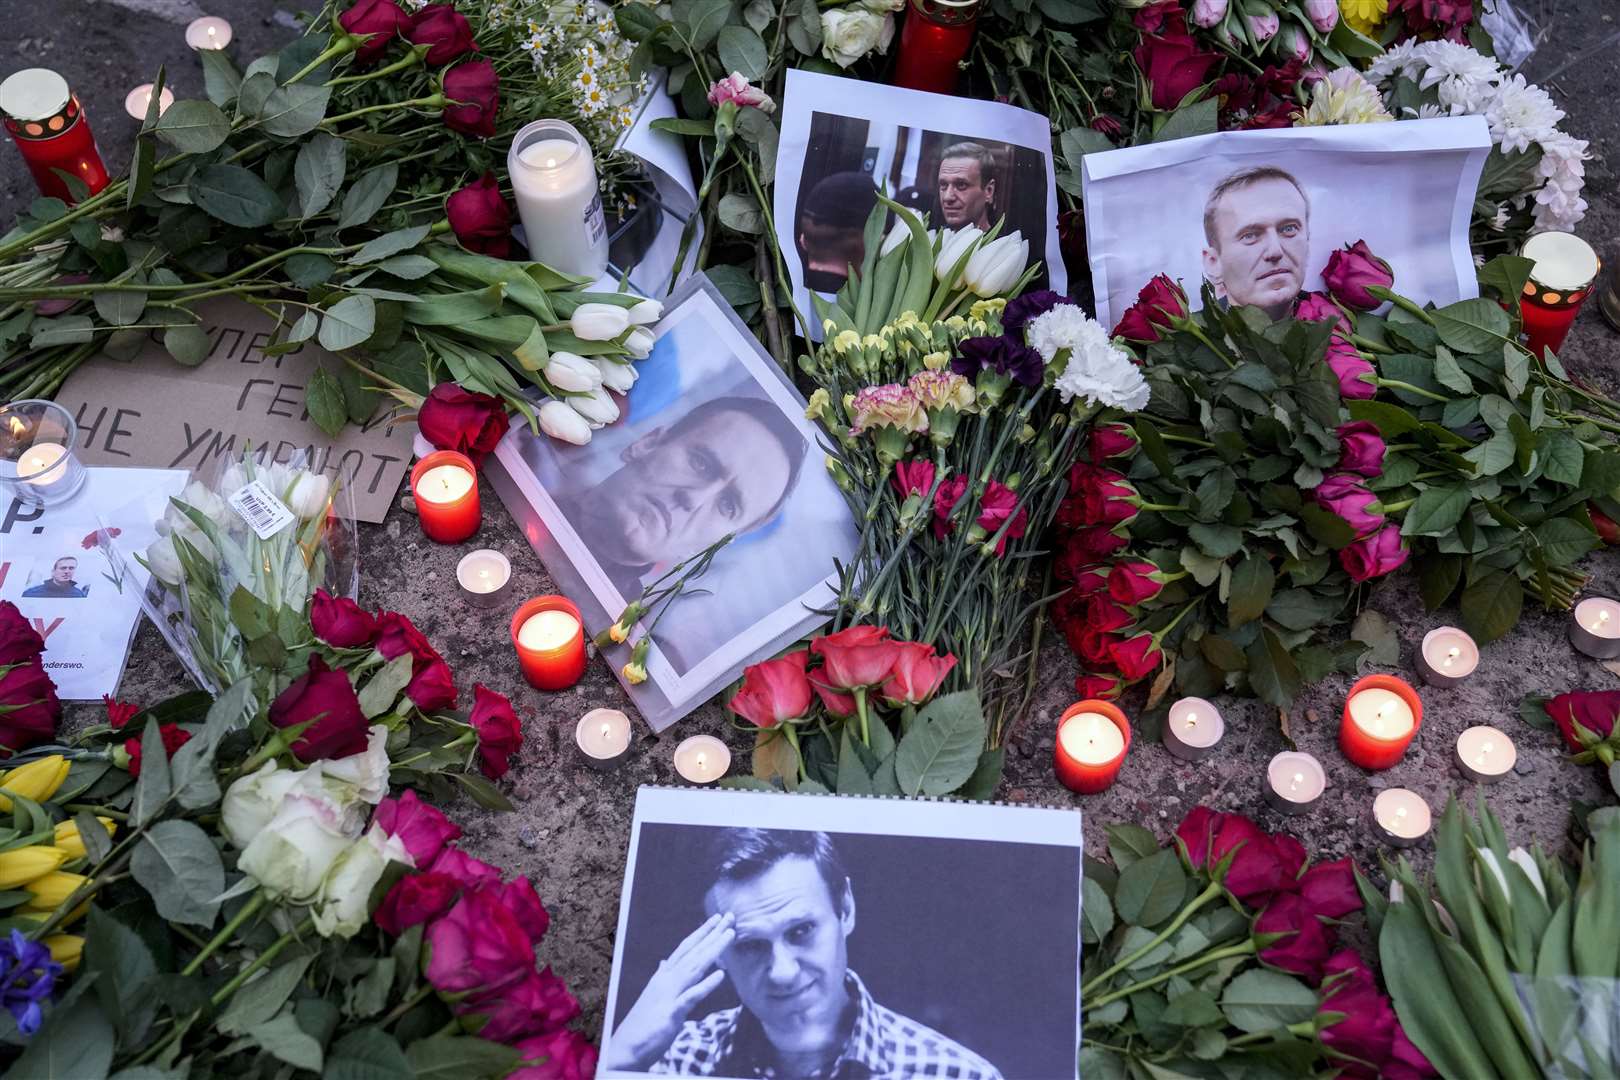 Portraits of Russian opposition leader Alexei Navalny, flowers and candles on the ground as people protest in front of the Russian embassy in Berlin, Germany (AP Photo/Ebrahim Noroozi)